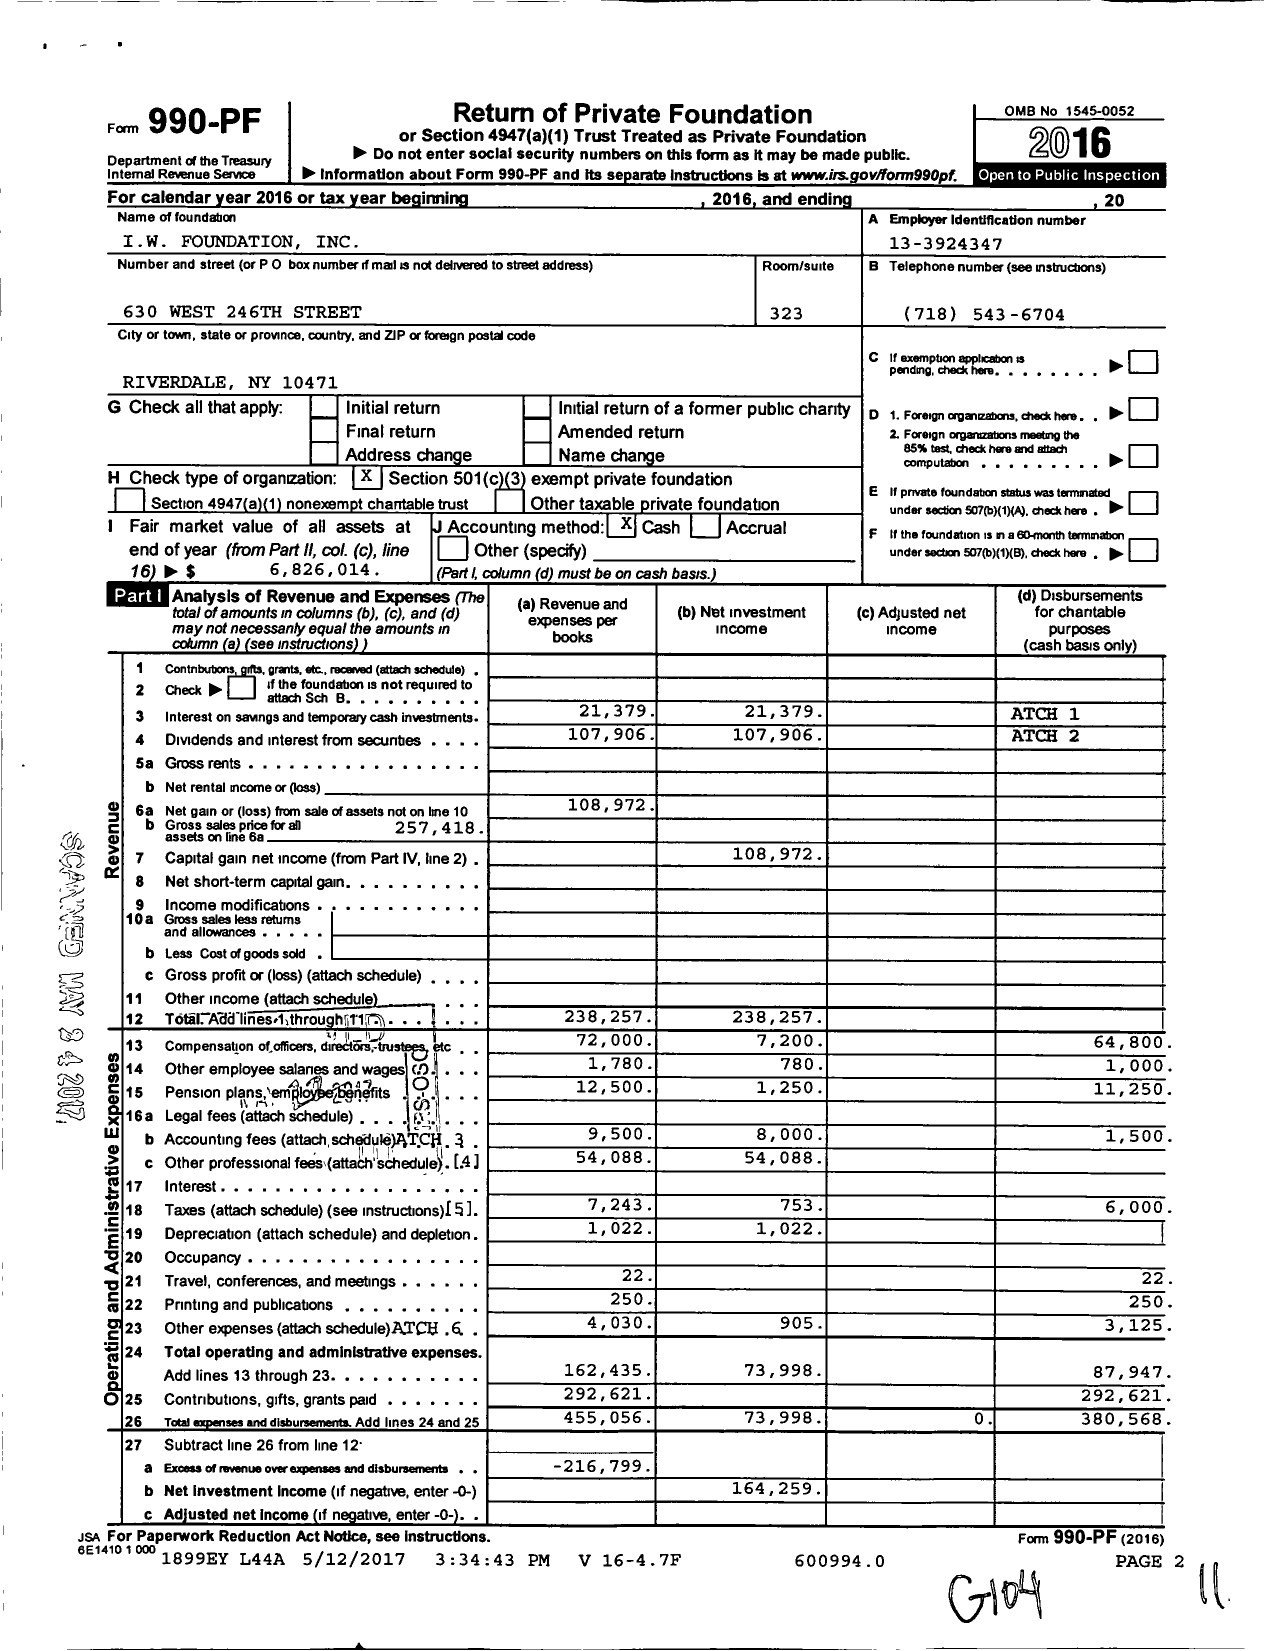 Image of first page of 2016 Form 990PF for Iw Foundation